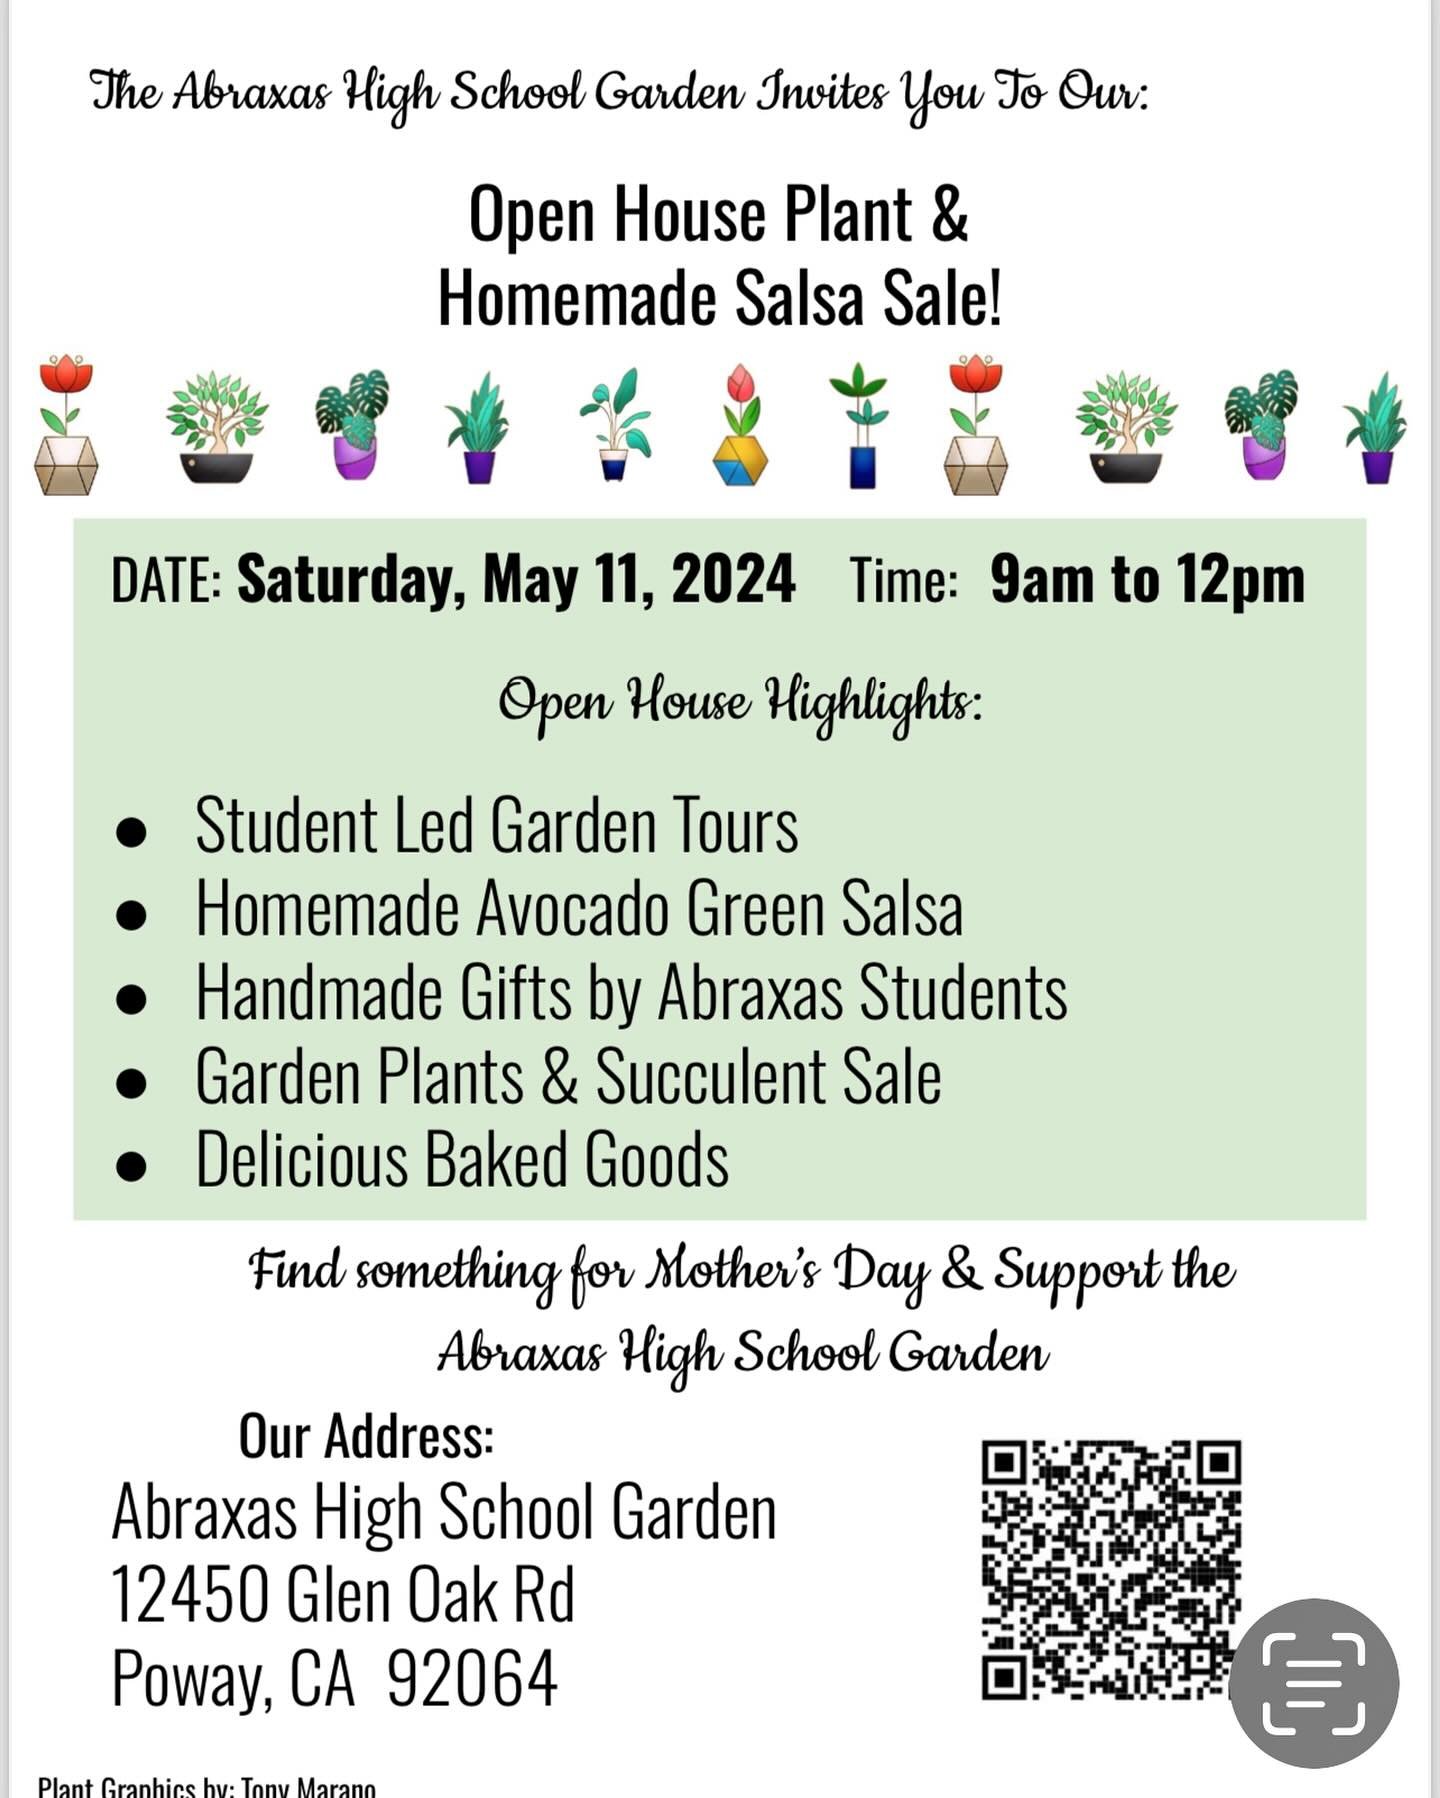 We are just over two weeks away from our garden fundraiser. 5/11/2024. We will be selling great plants for your garden, our famous green avocado salsa as well as student art. Come support us.